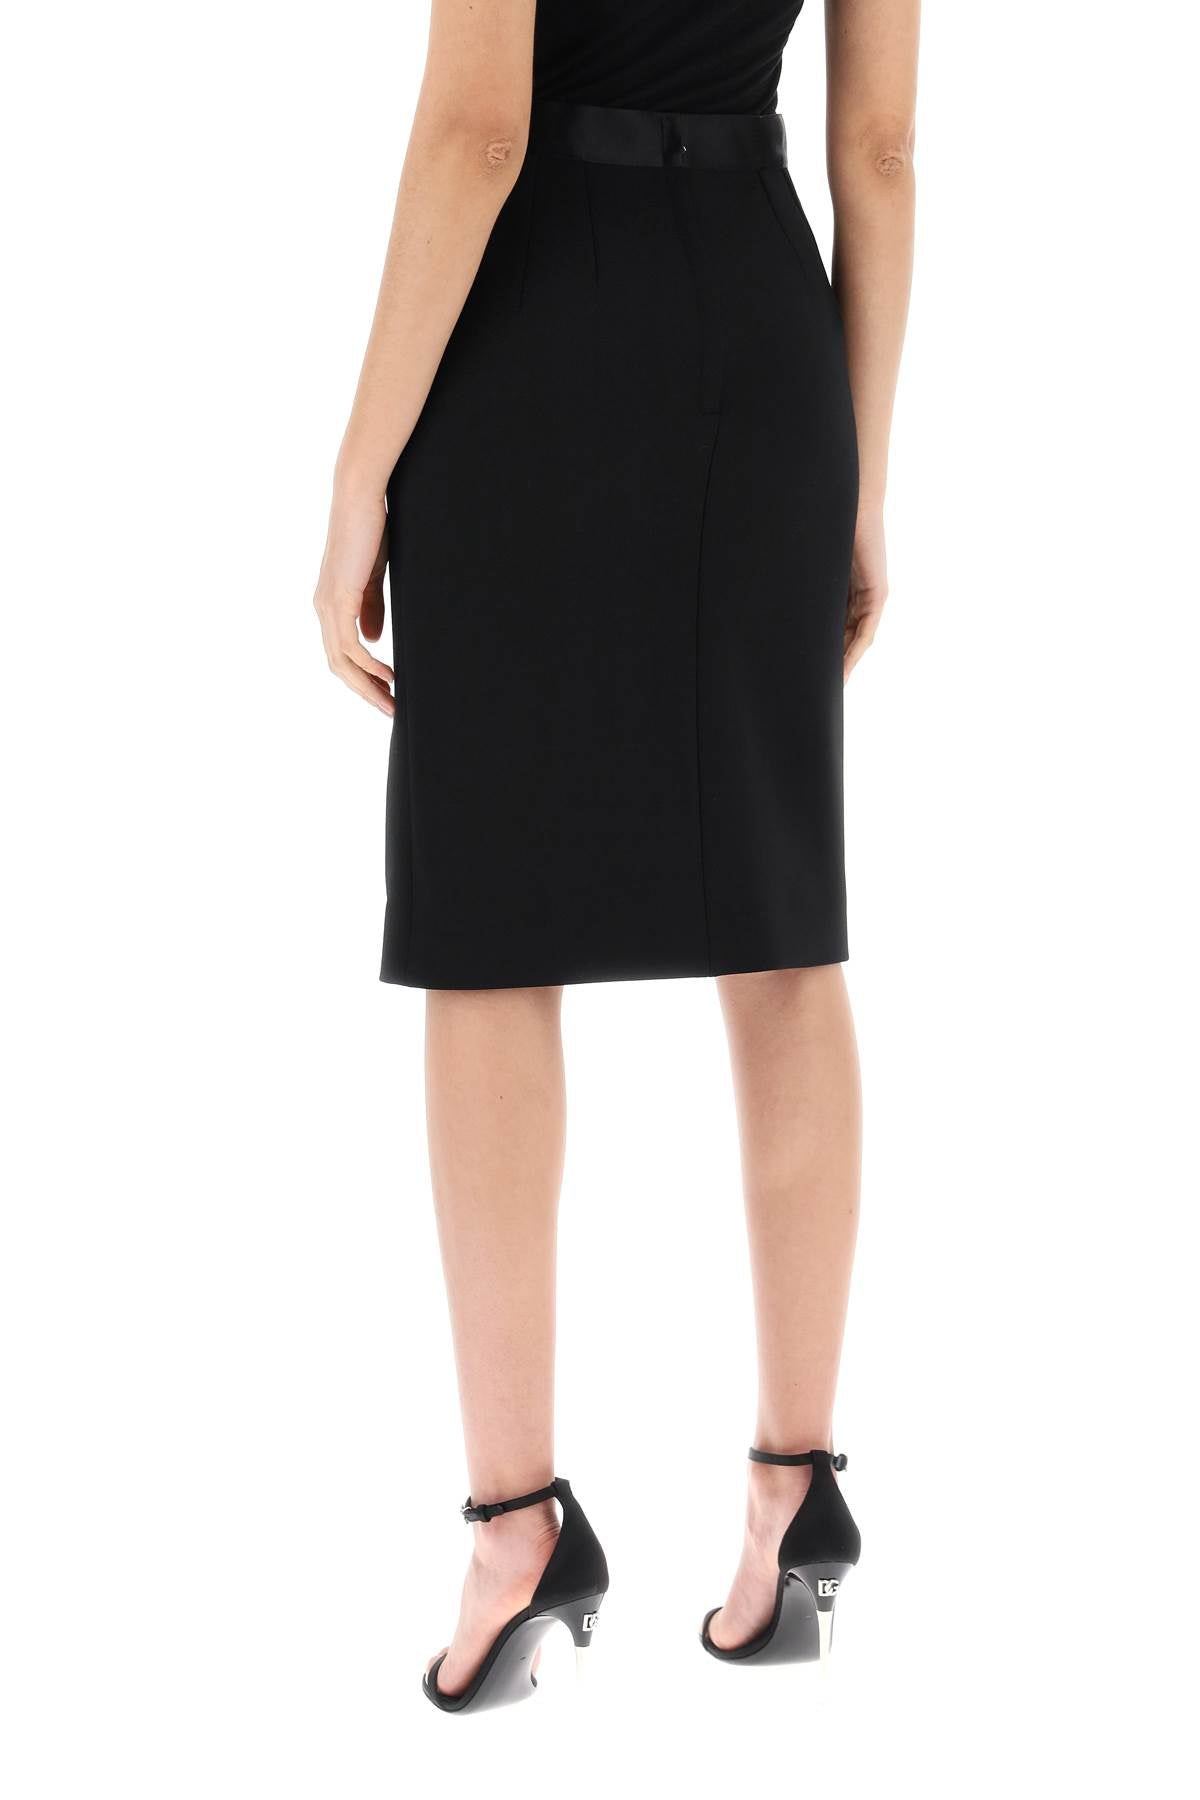 Dolce & Gabbana Replace With Double Quoteknee Length Skirt With Satin   Black